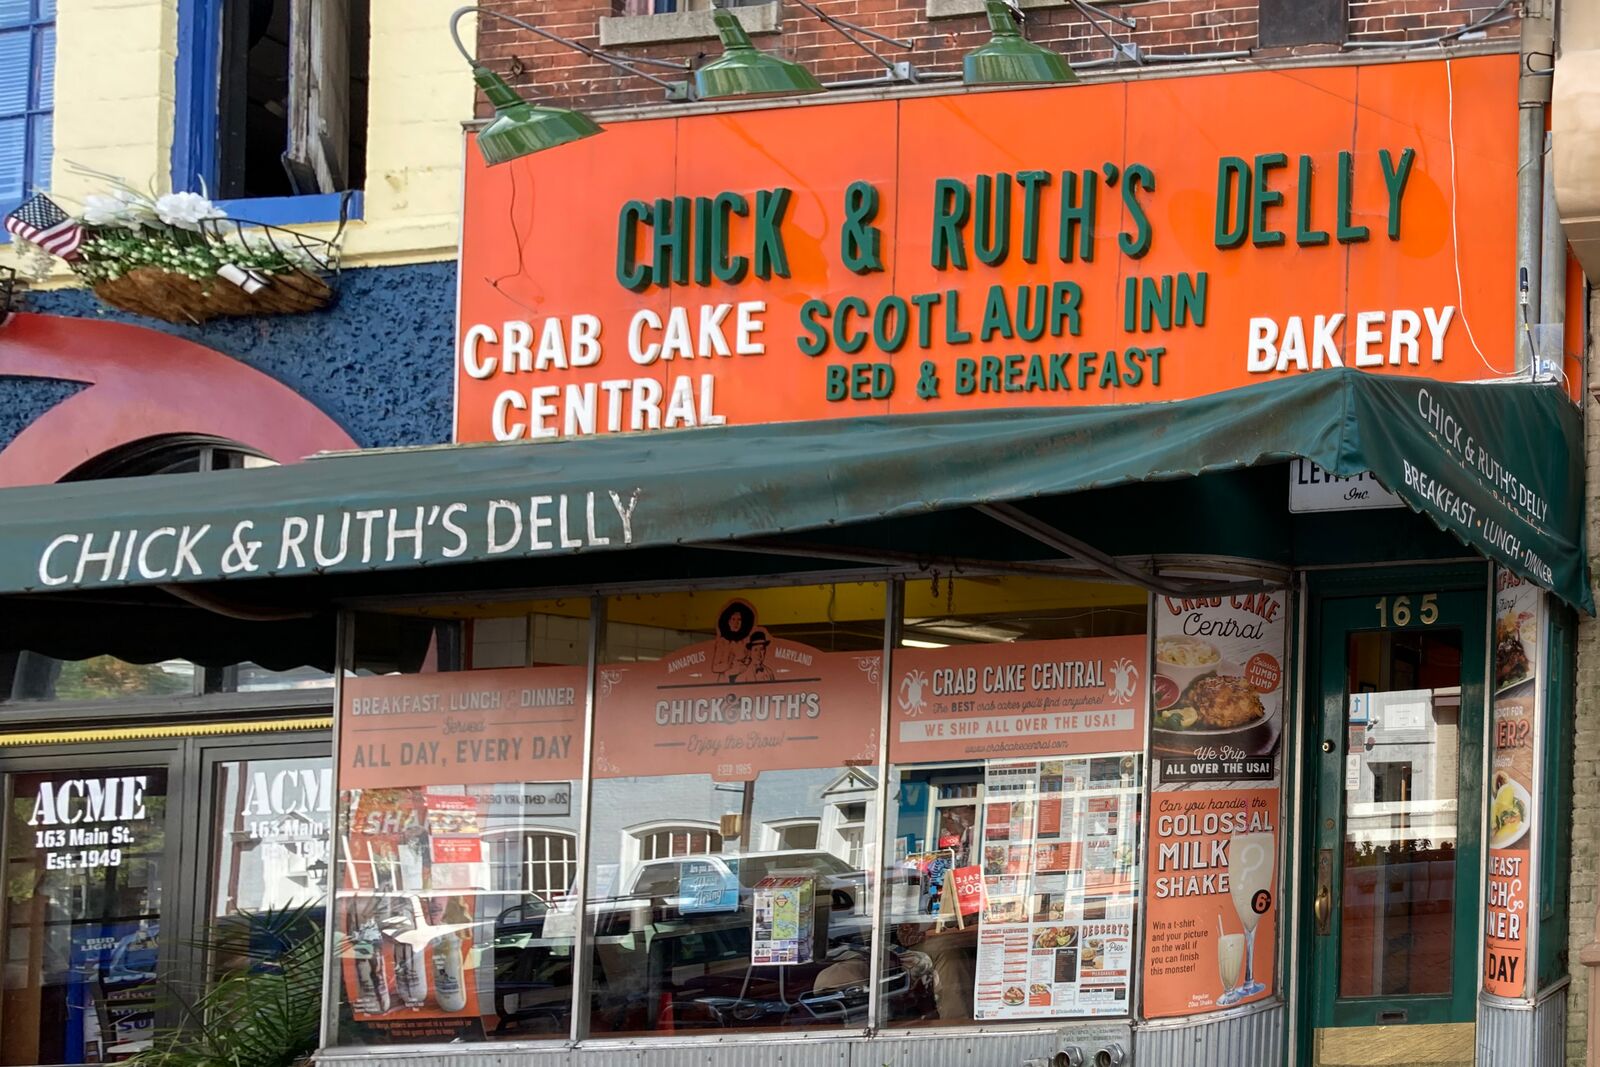 Chick & Ruth's Delly in Annapolis